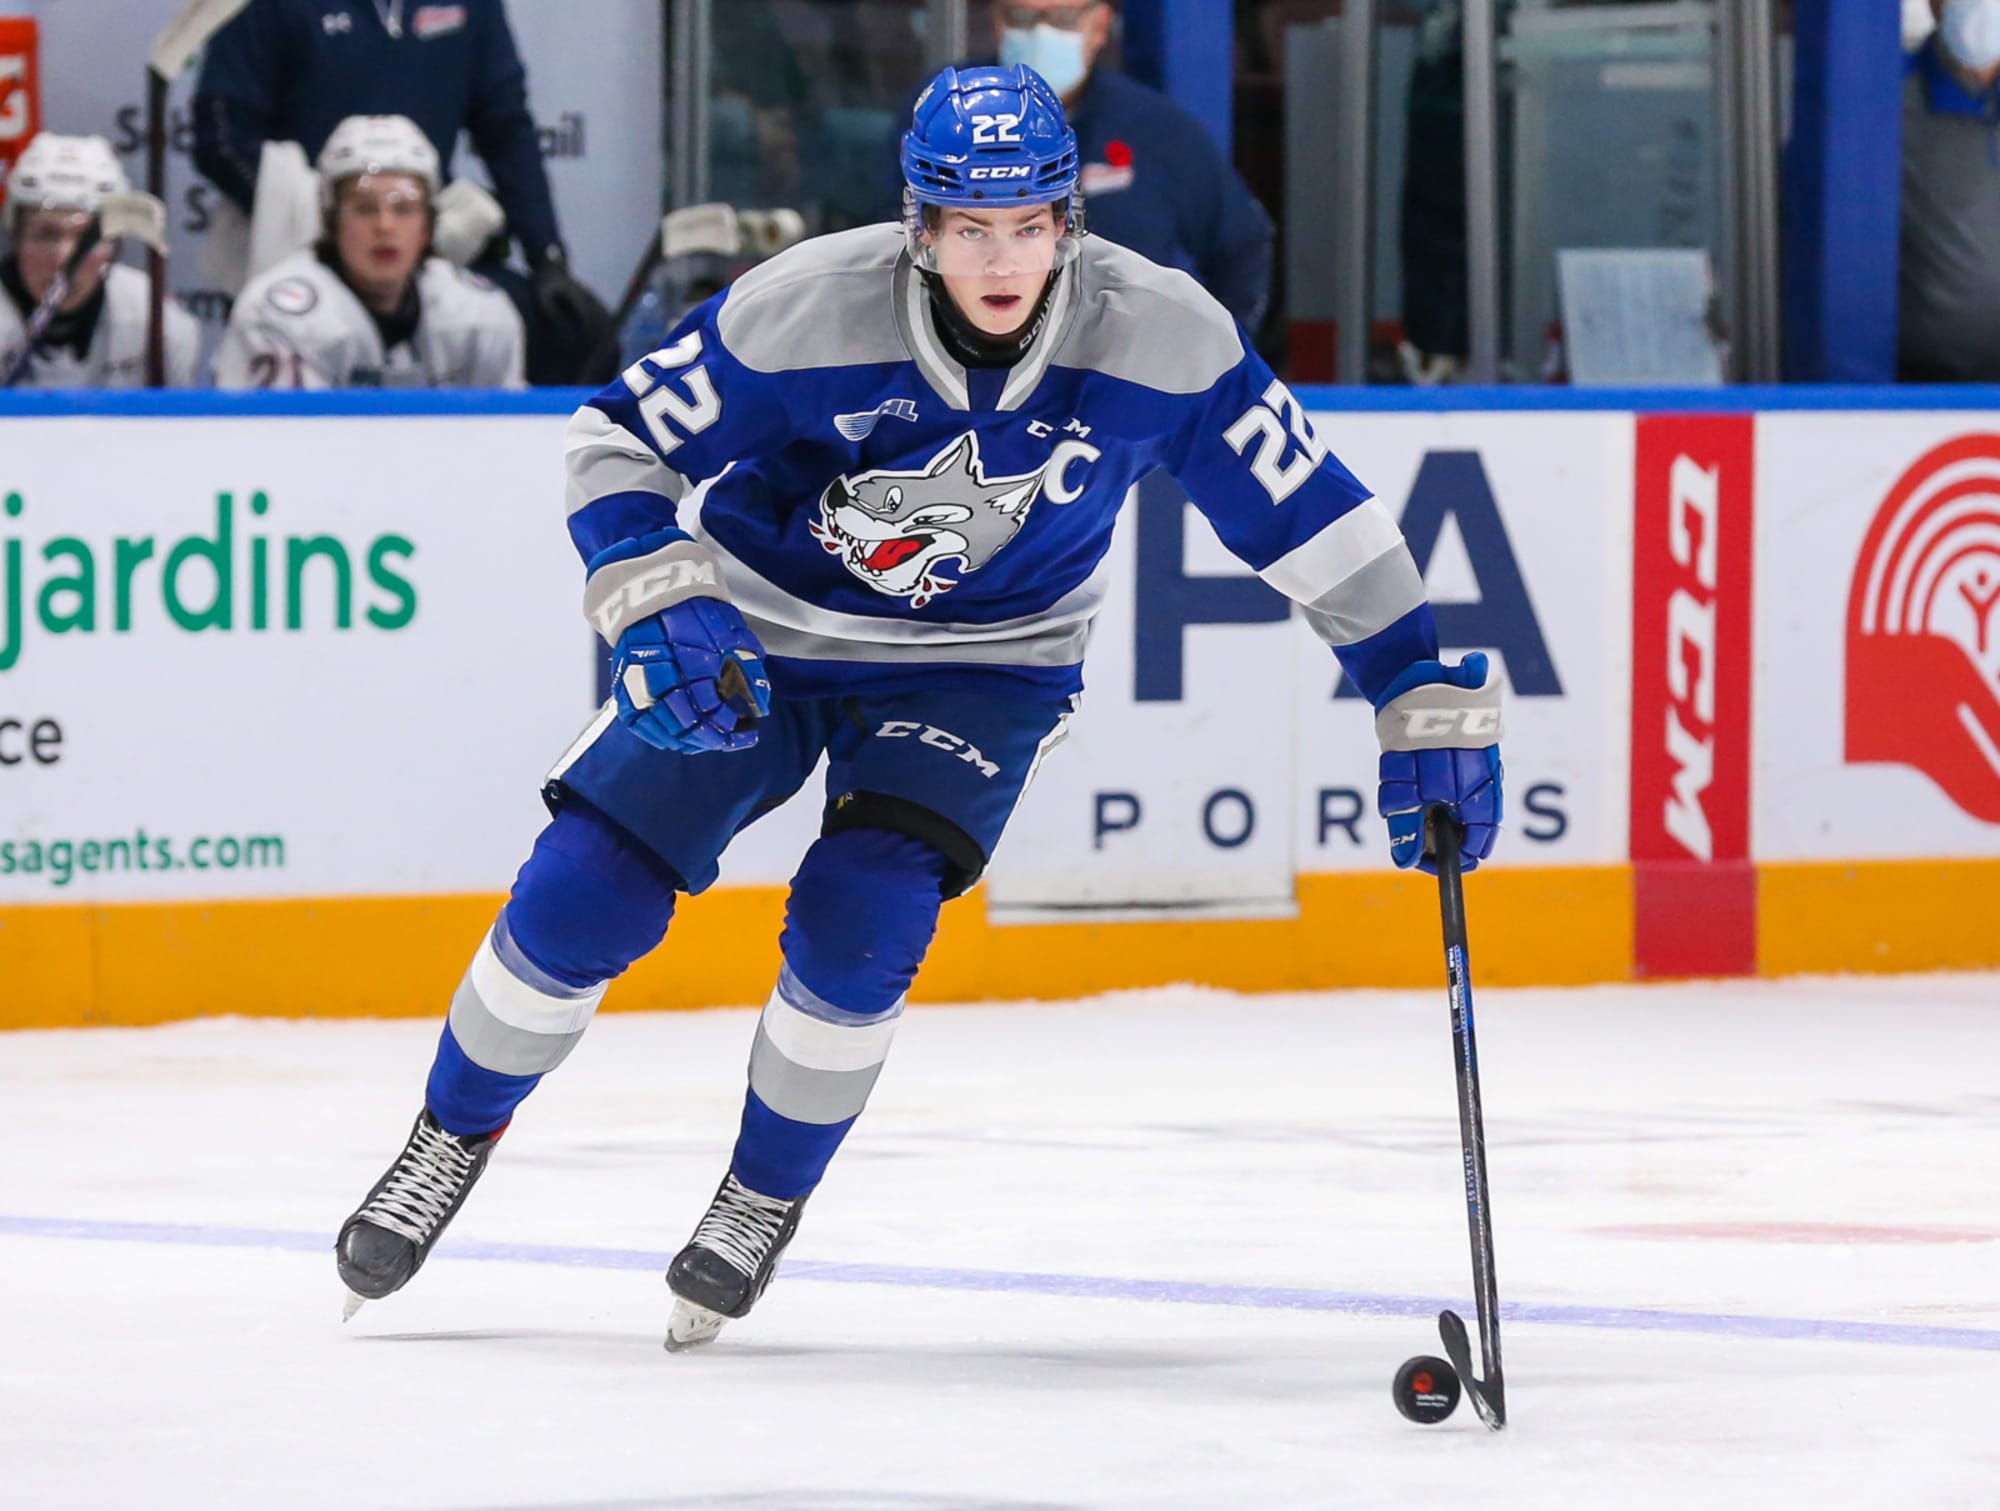 Lightning Prospects Find New Homes Ahead of the OHL Trade Deadline